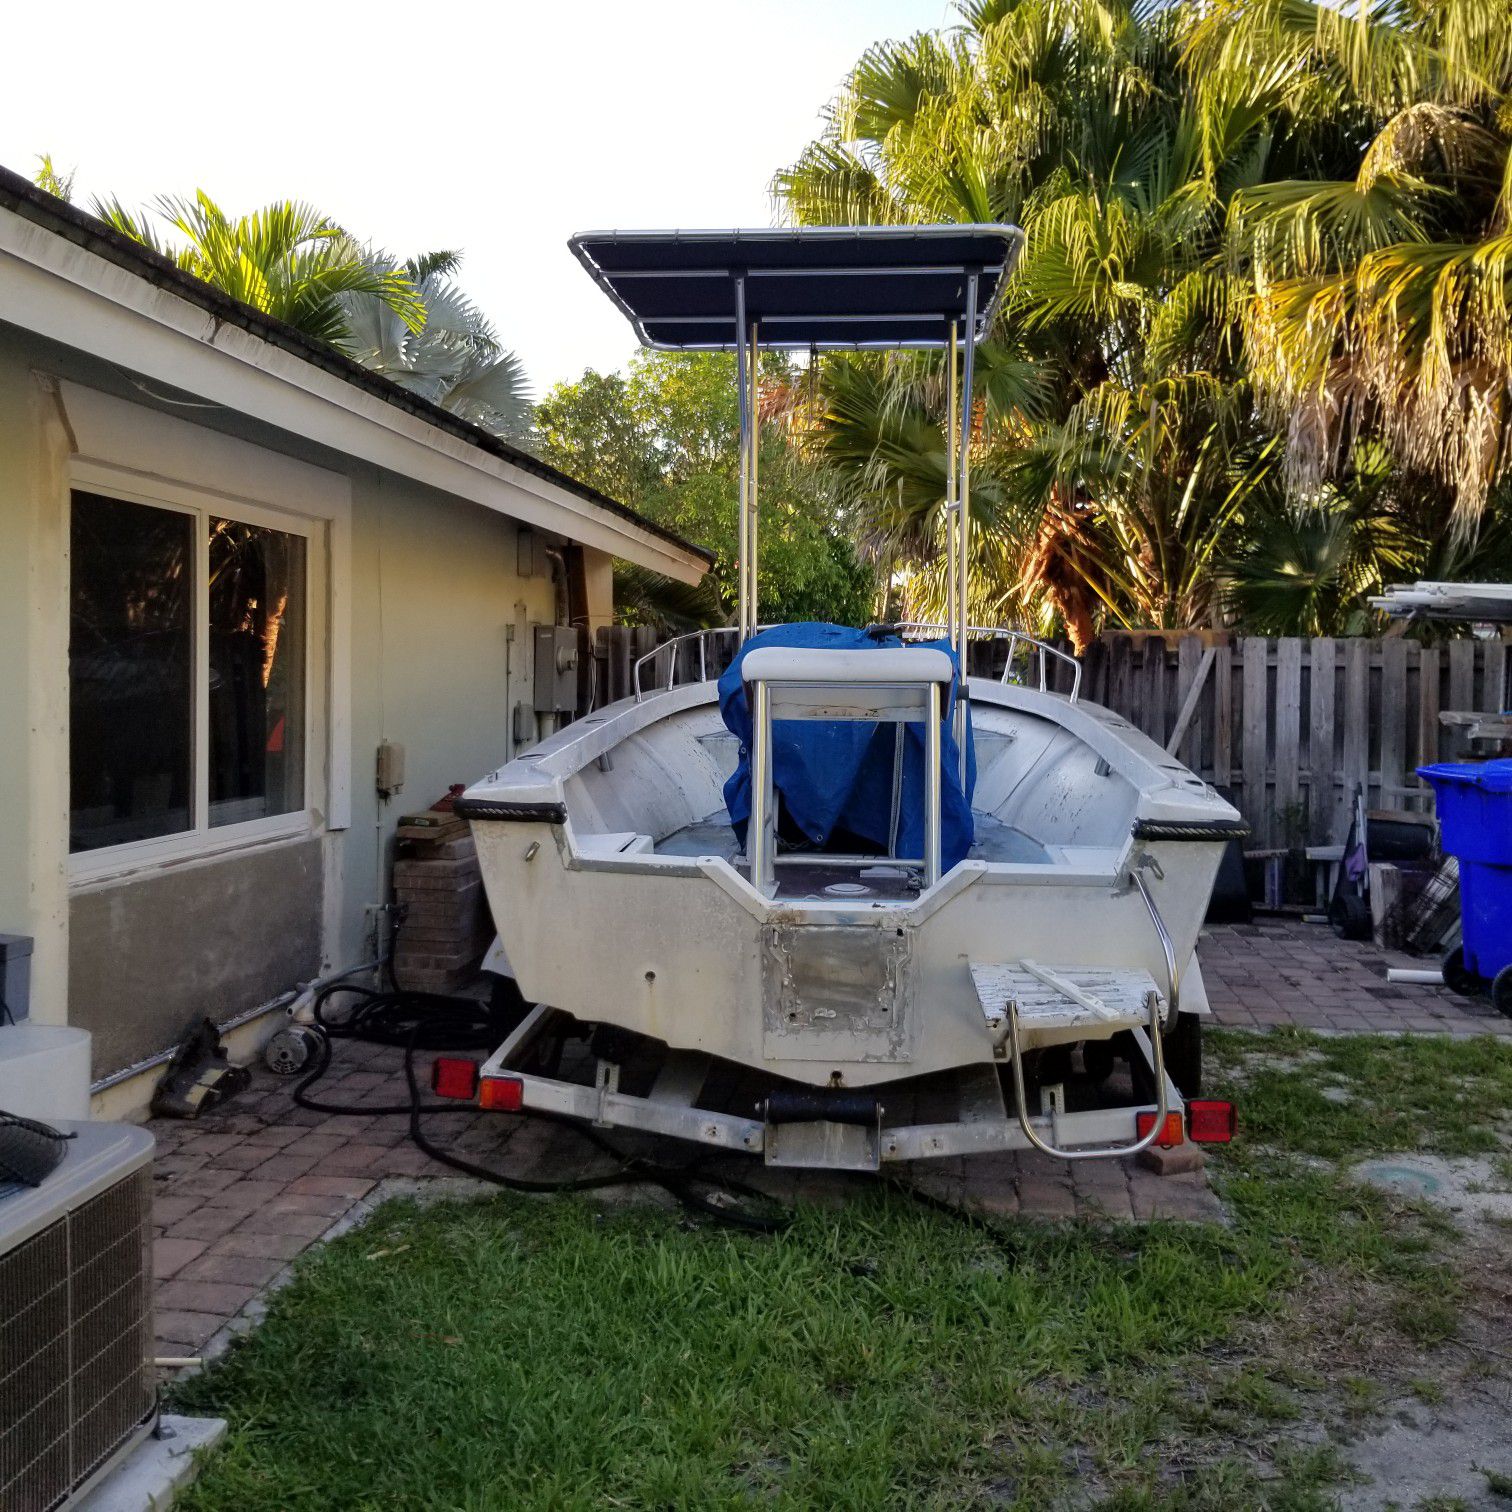 83 Wellcraft 17 foot boat and trailer